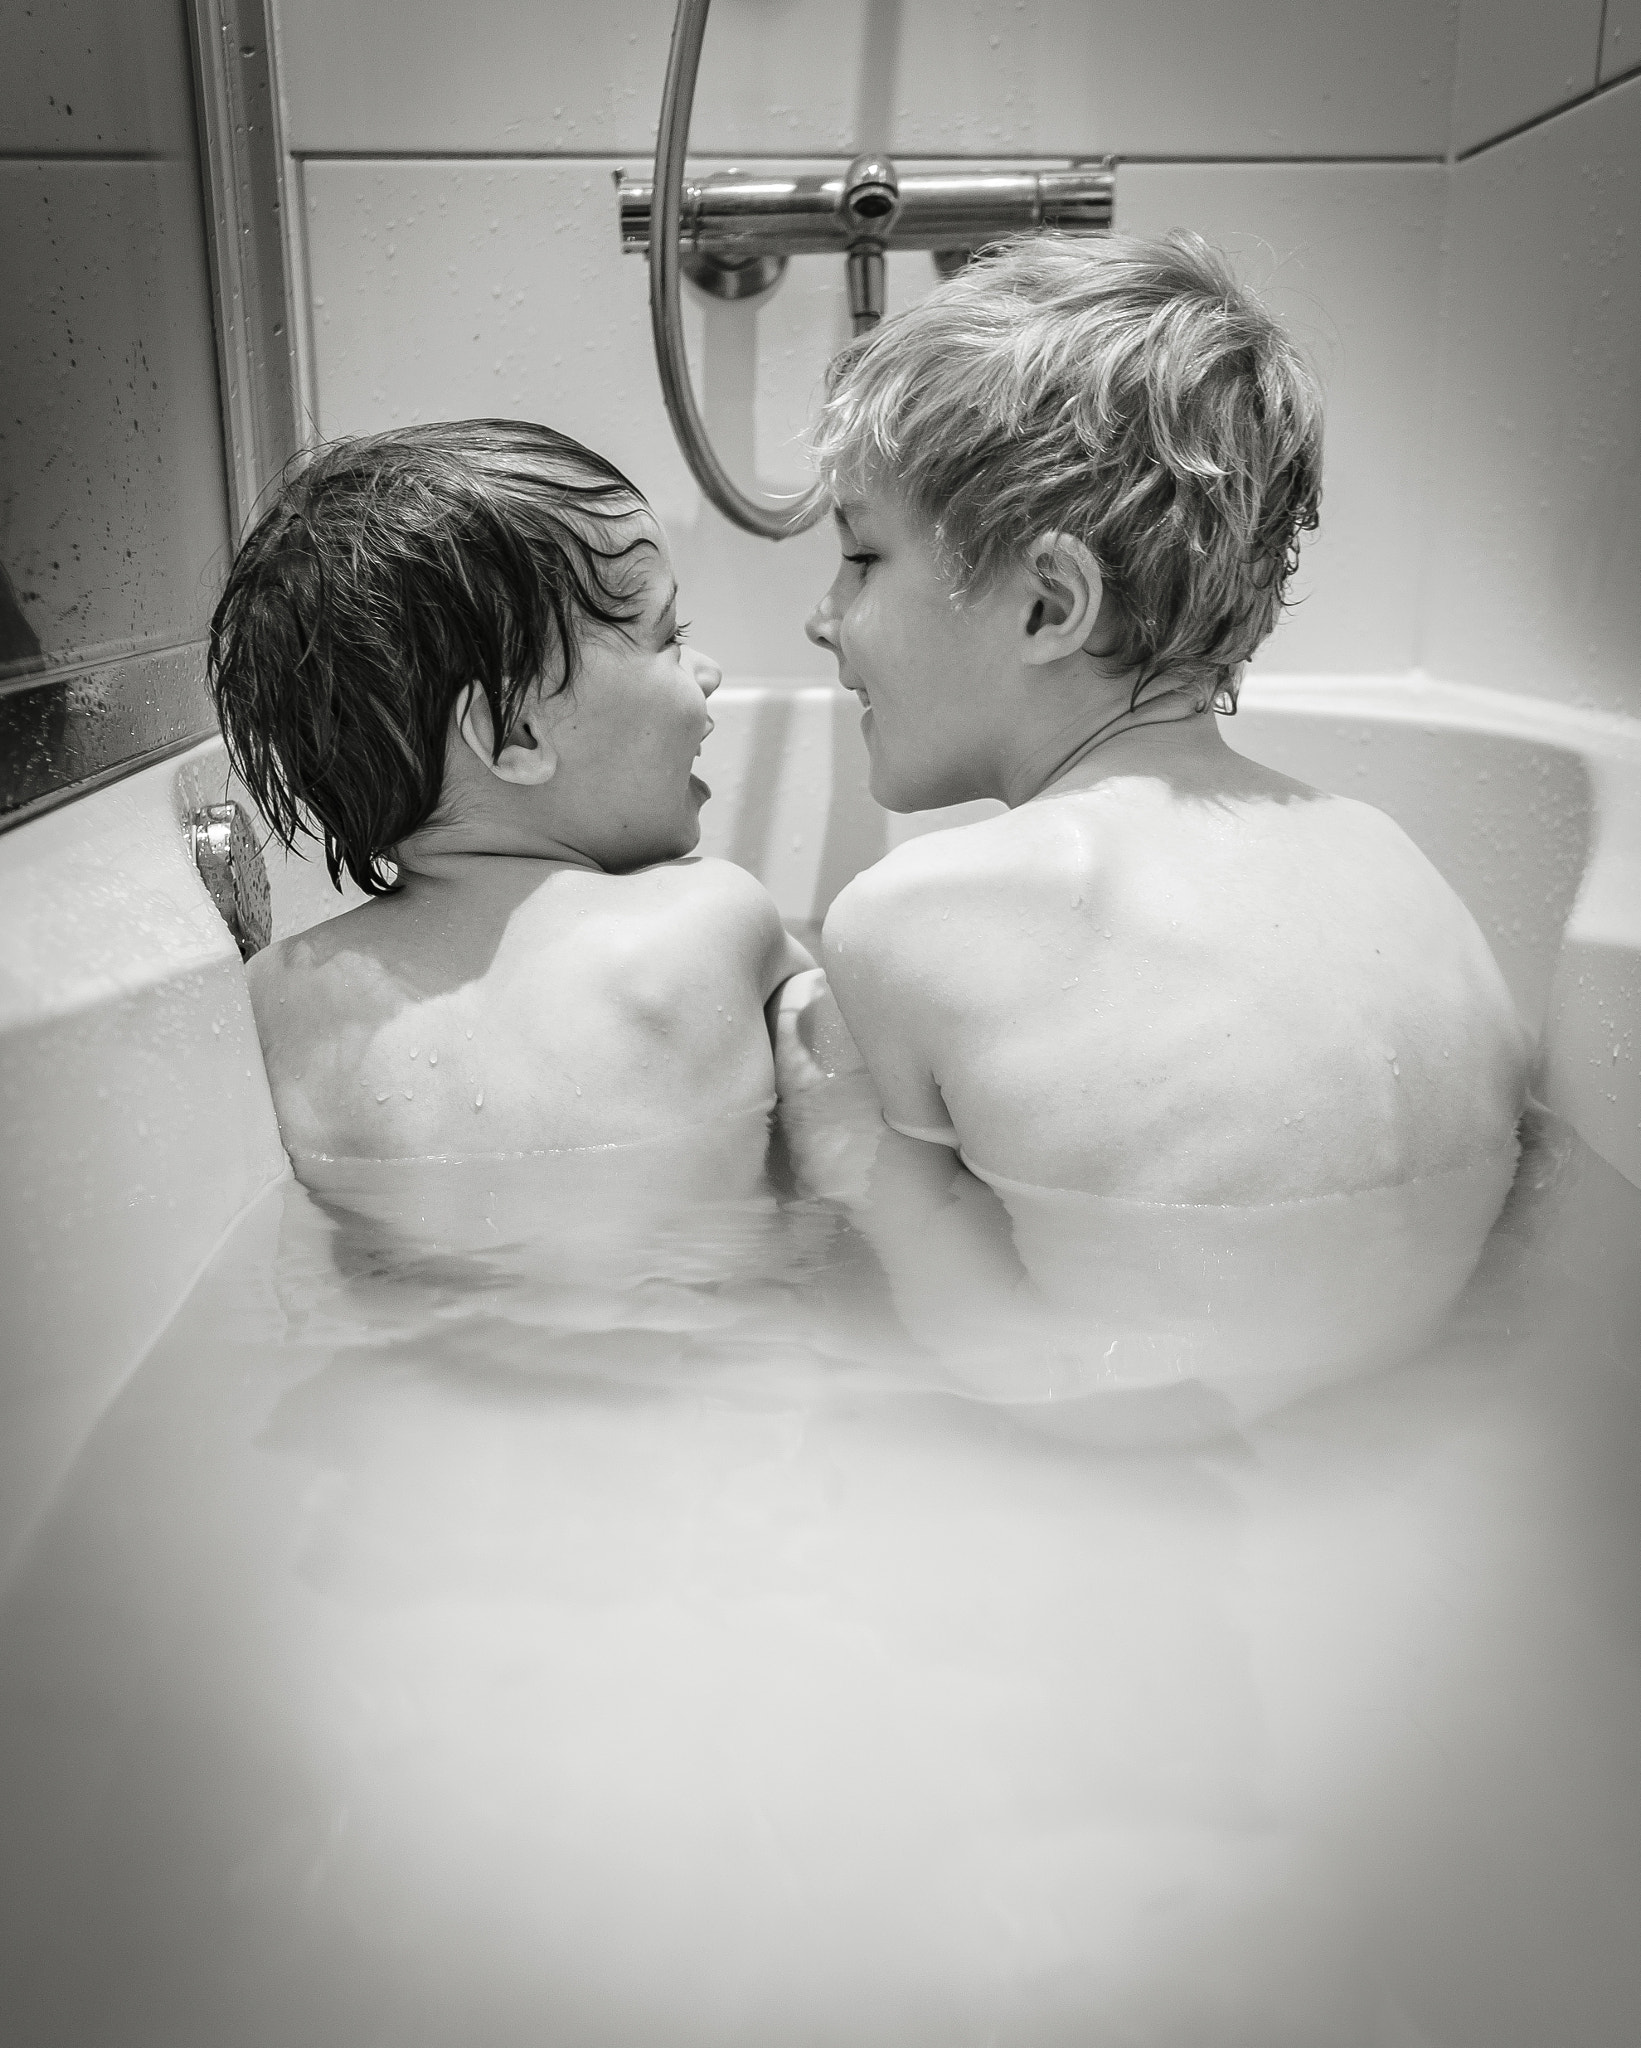 Fujifilm X-Pro2 sample photo. Chiel (left) and joep in a bath photography